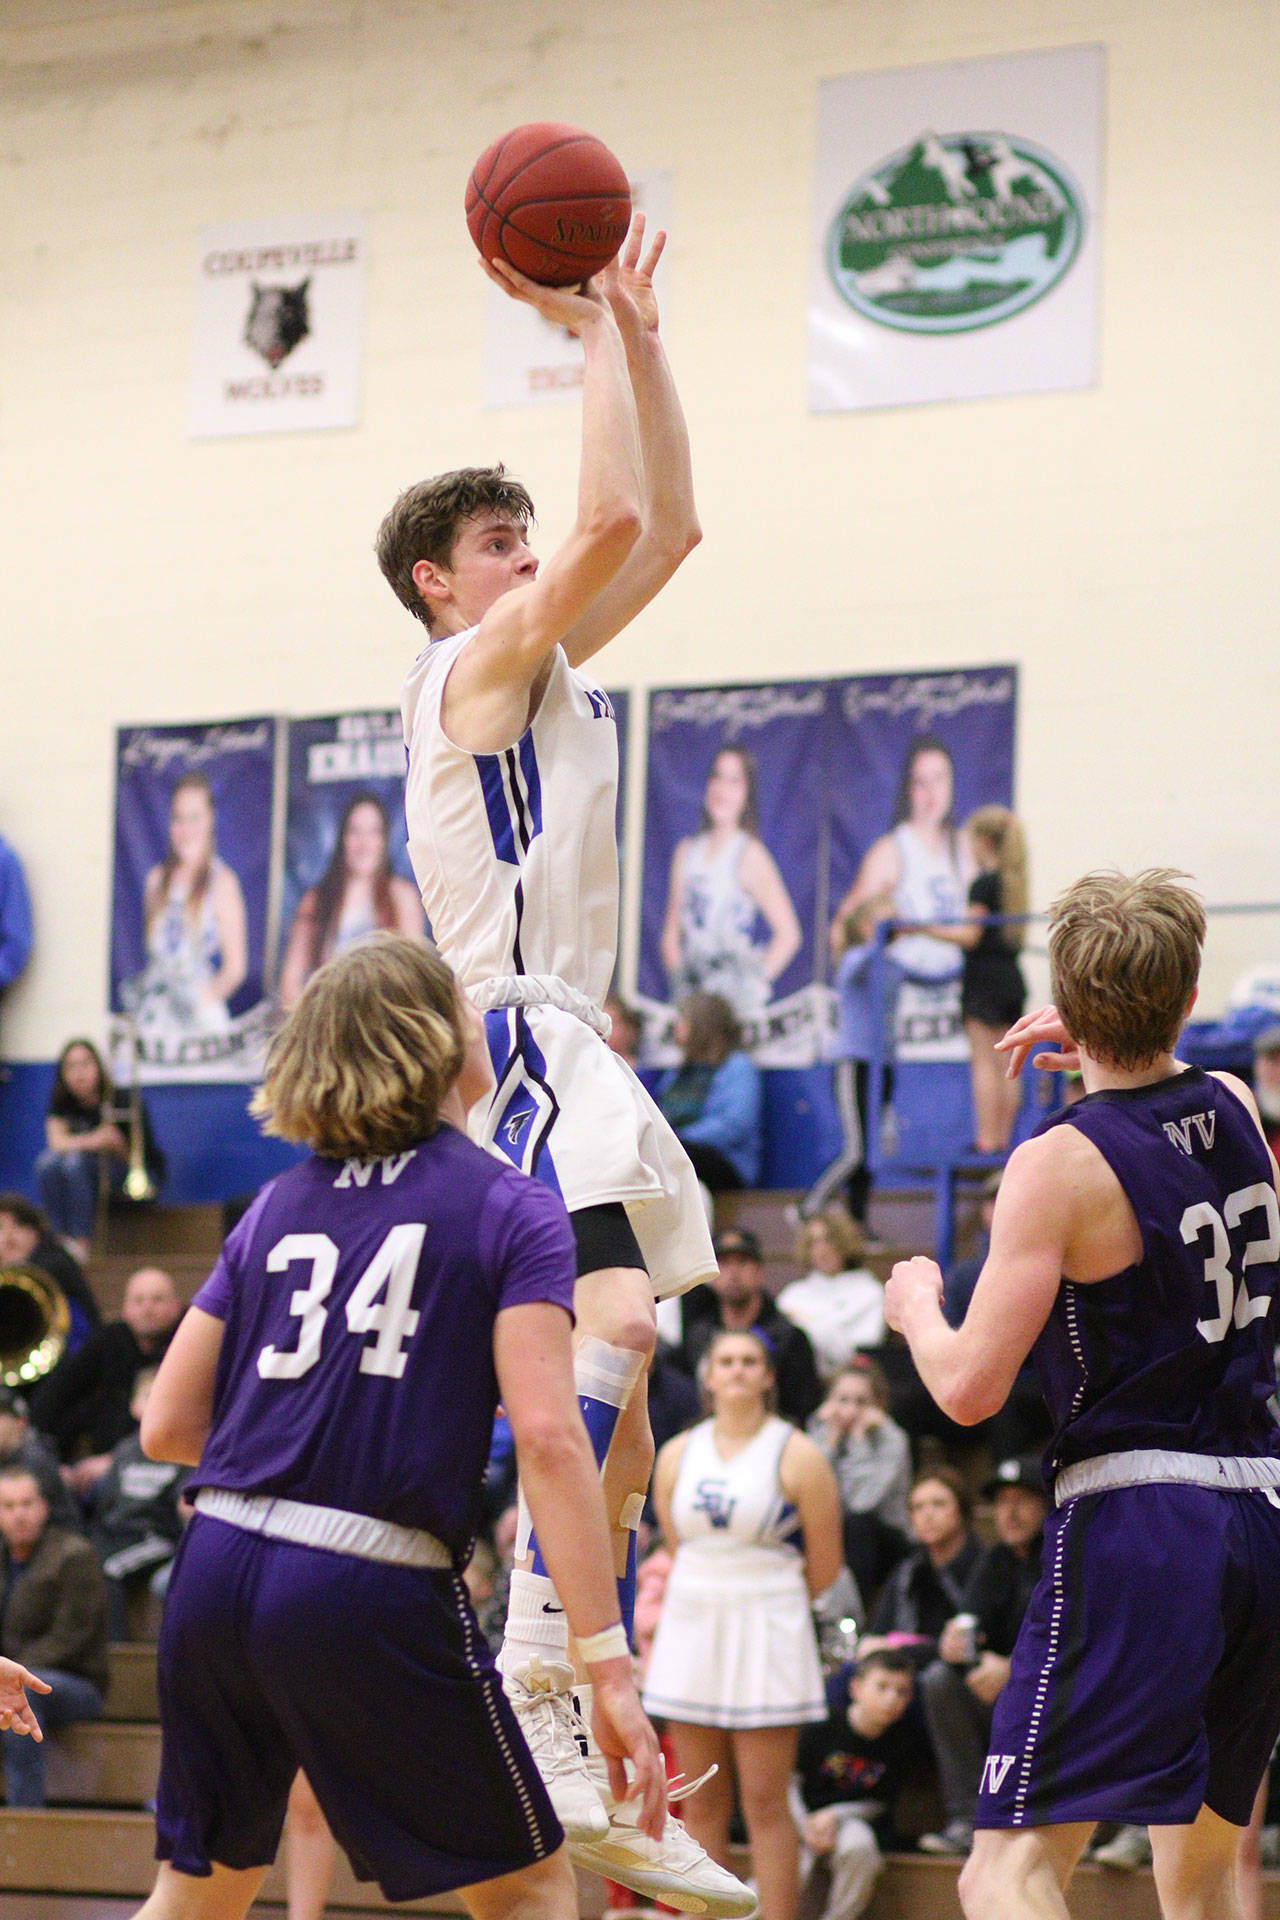 Carson Wrightson scores 2 of his game-high 20 points. (Photo by Steve Smith)